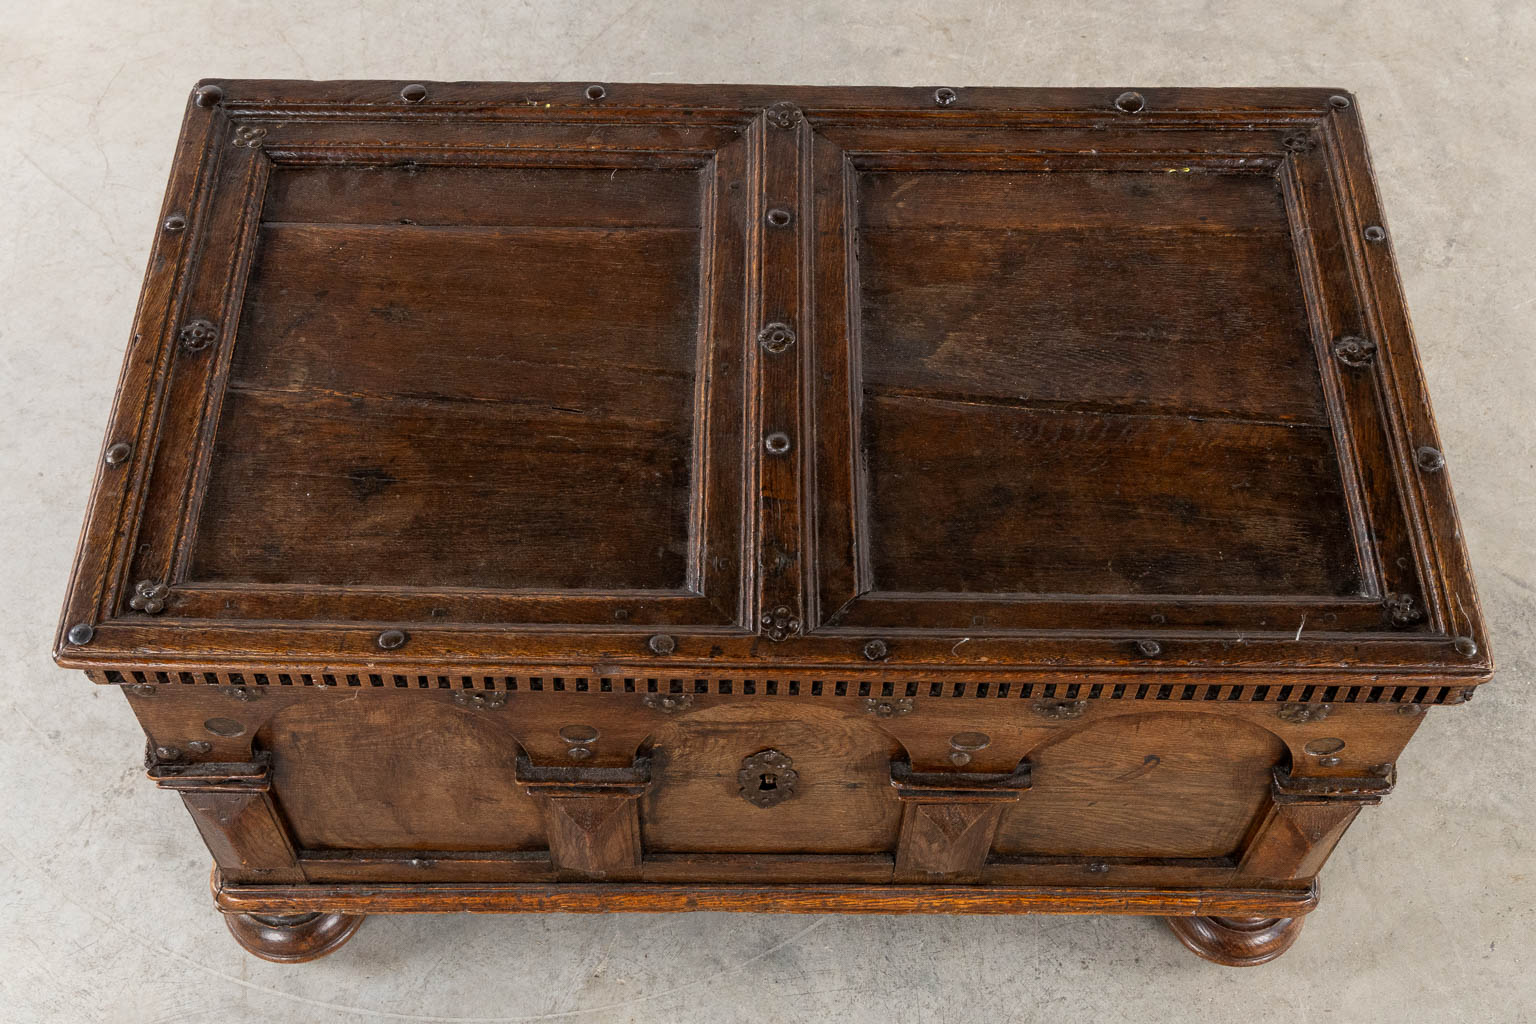 An antique chest mounted with wrought-iron, The Netherlands, 17th C. (L:57 x W:97 x H:56 cm) - Image 8 of 11